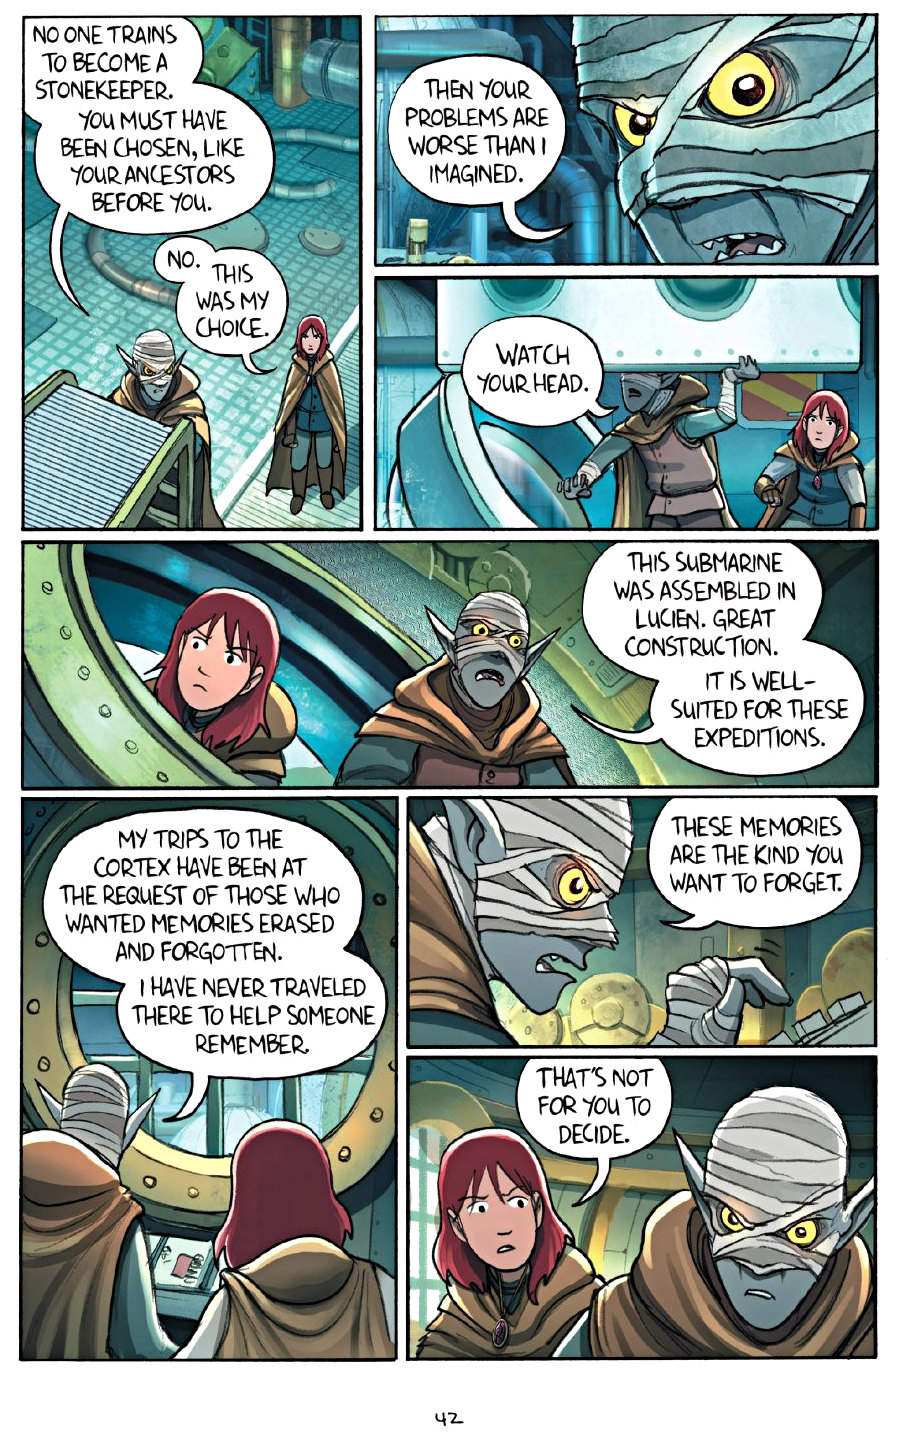 page 42 of amulet 7 firelight graphic novel